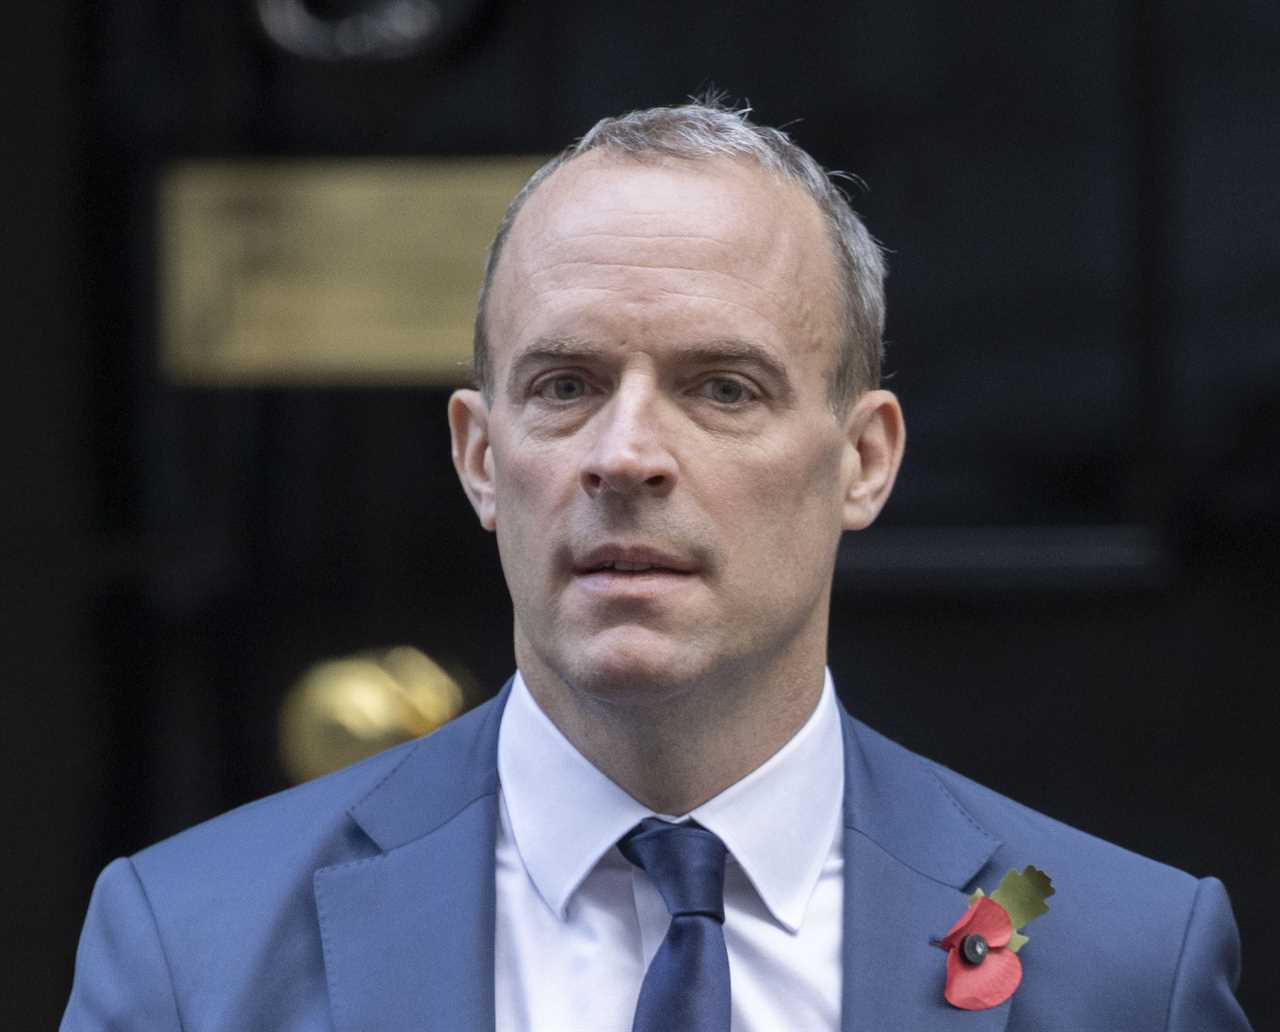 Dominic Raab accused of chucking tomatoes across a room in an explosive ‘tirade’ at Ministry of Justice staff